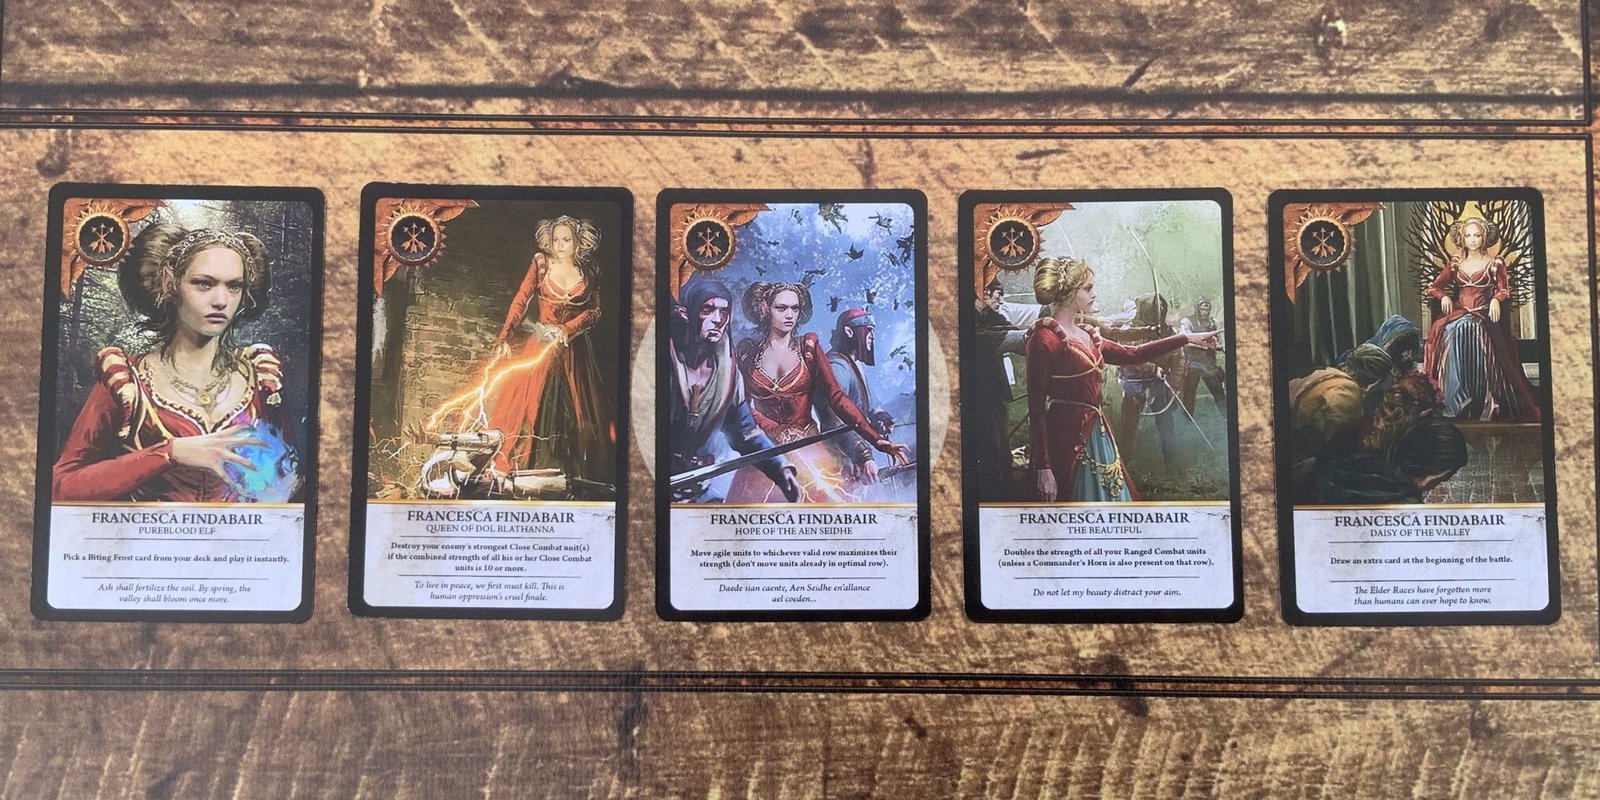 The five Francesca Findabair Scoia'tael faction leader Gwent card options from The Witcher 3